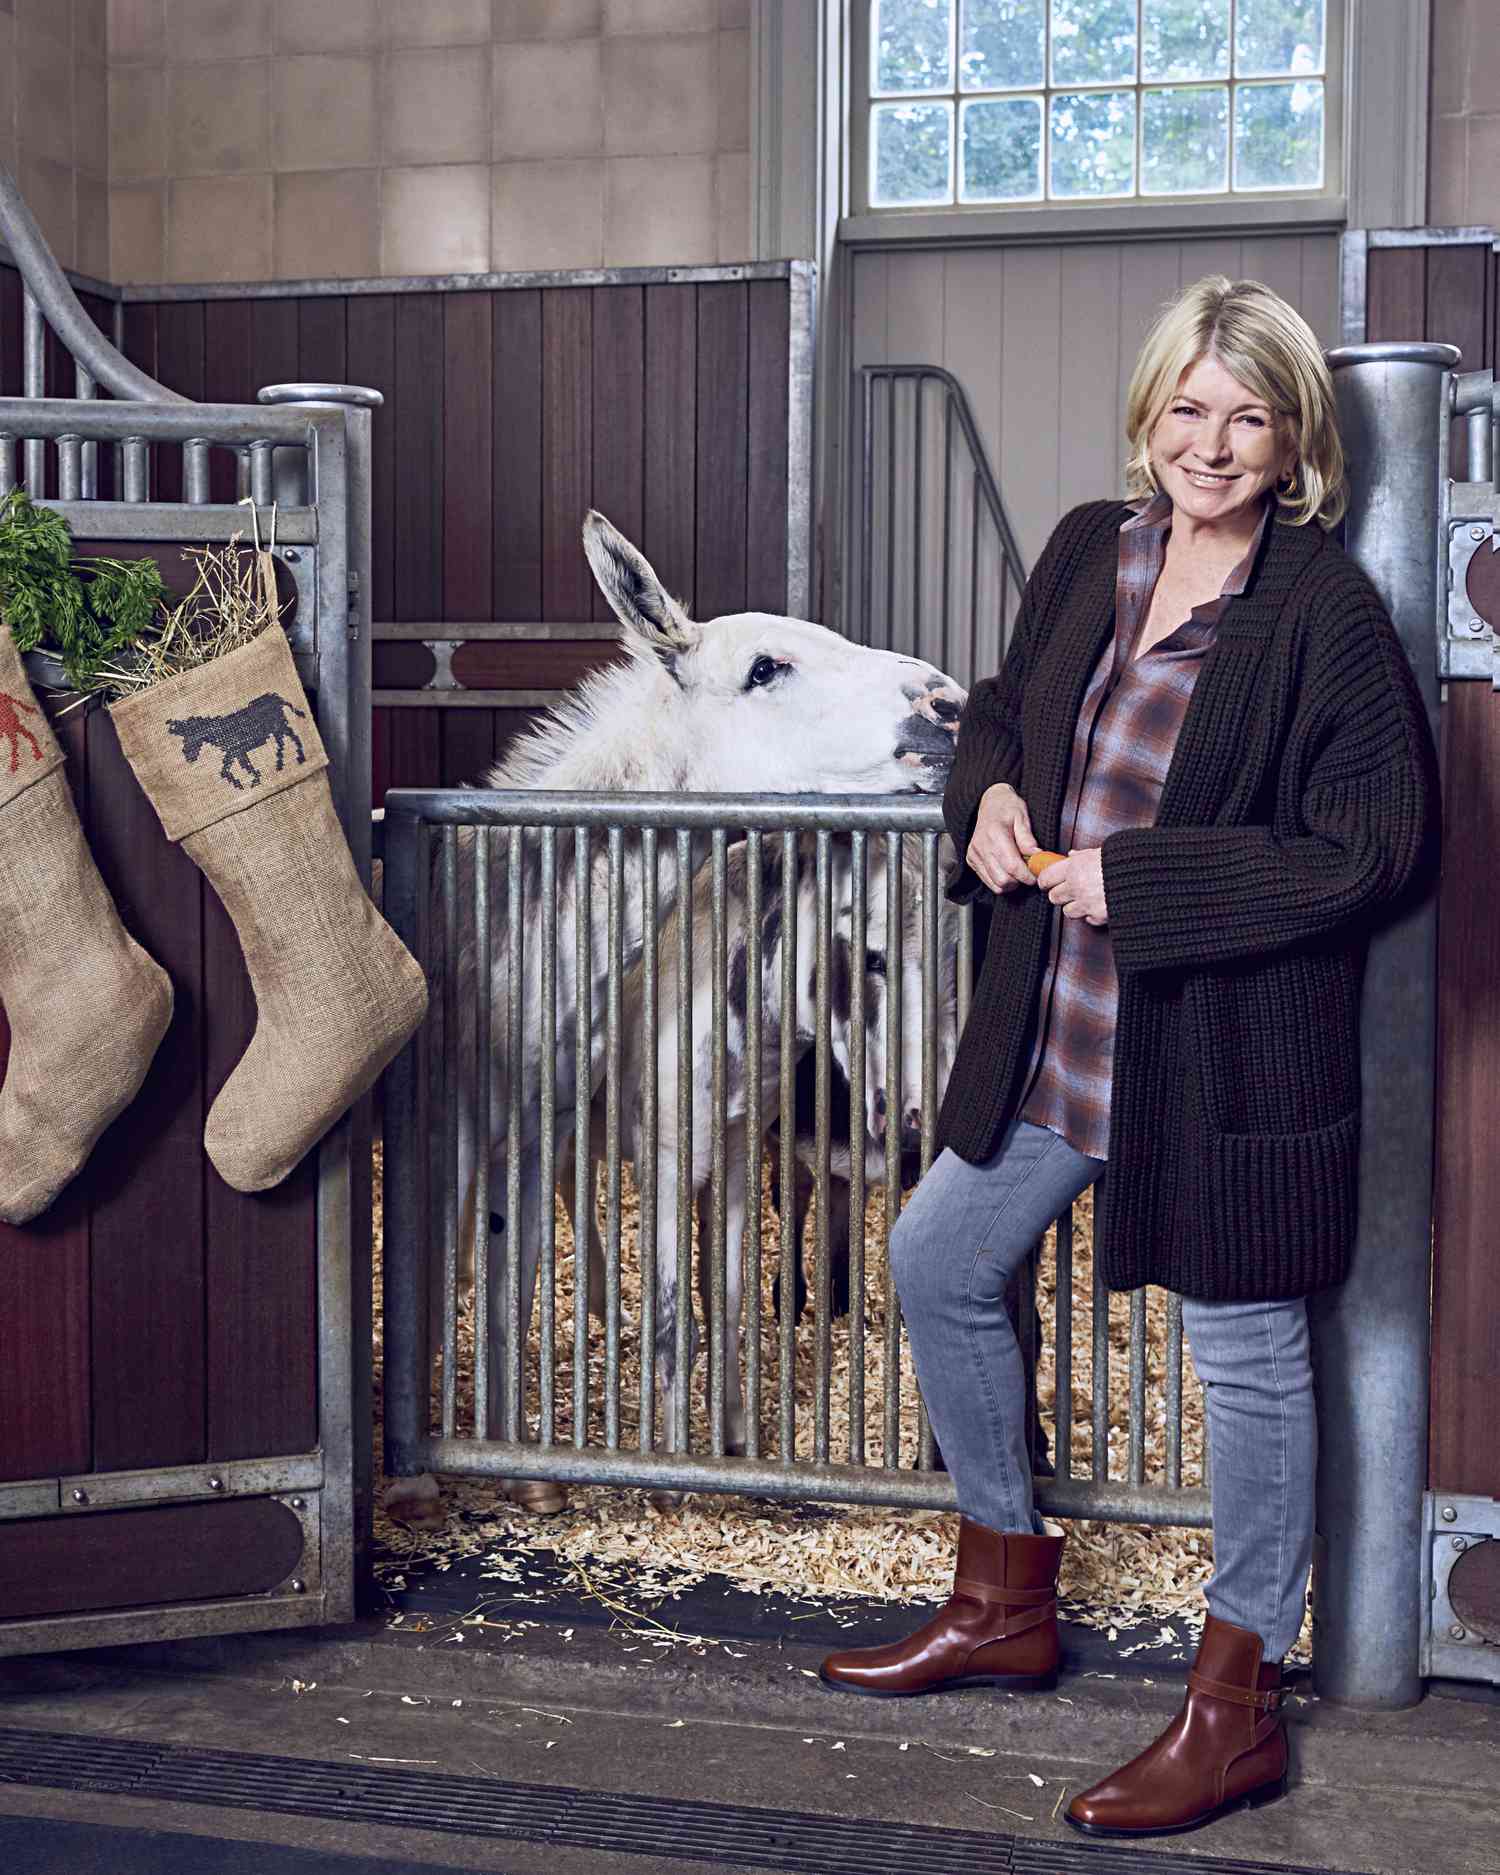 martha in stables with donkey